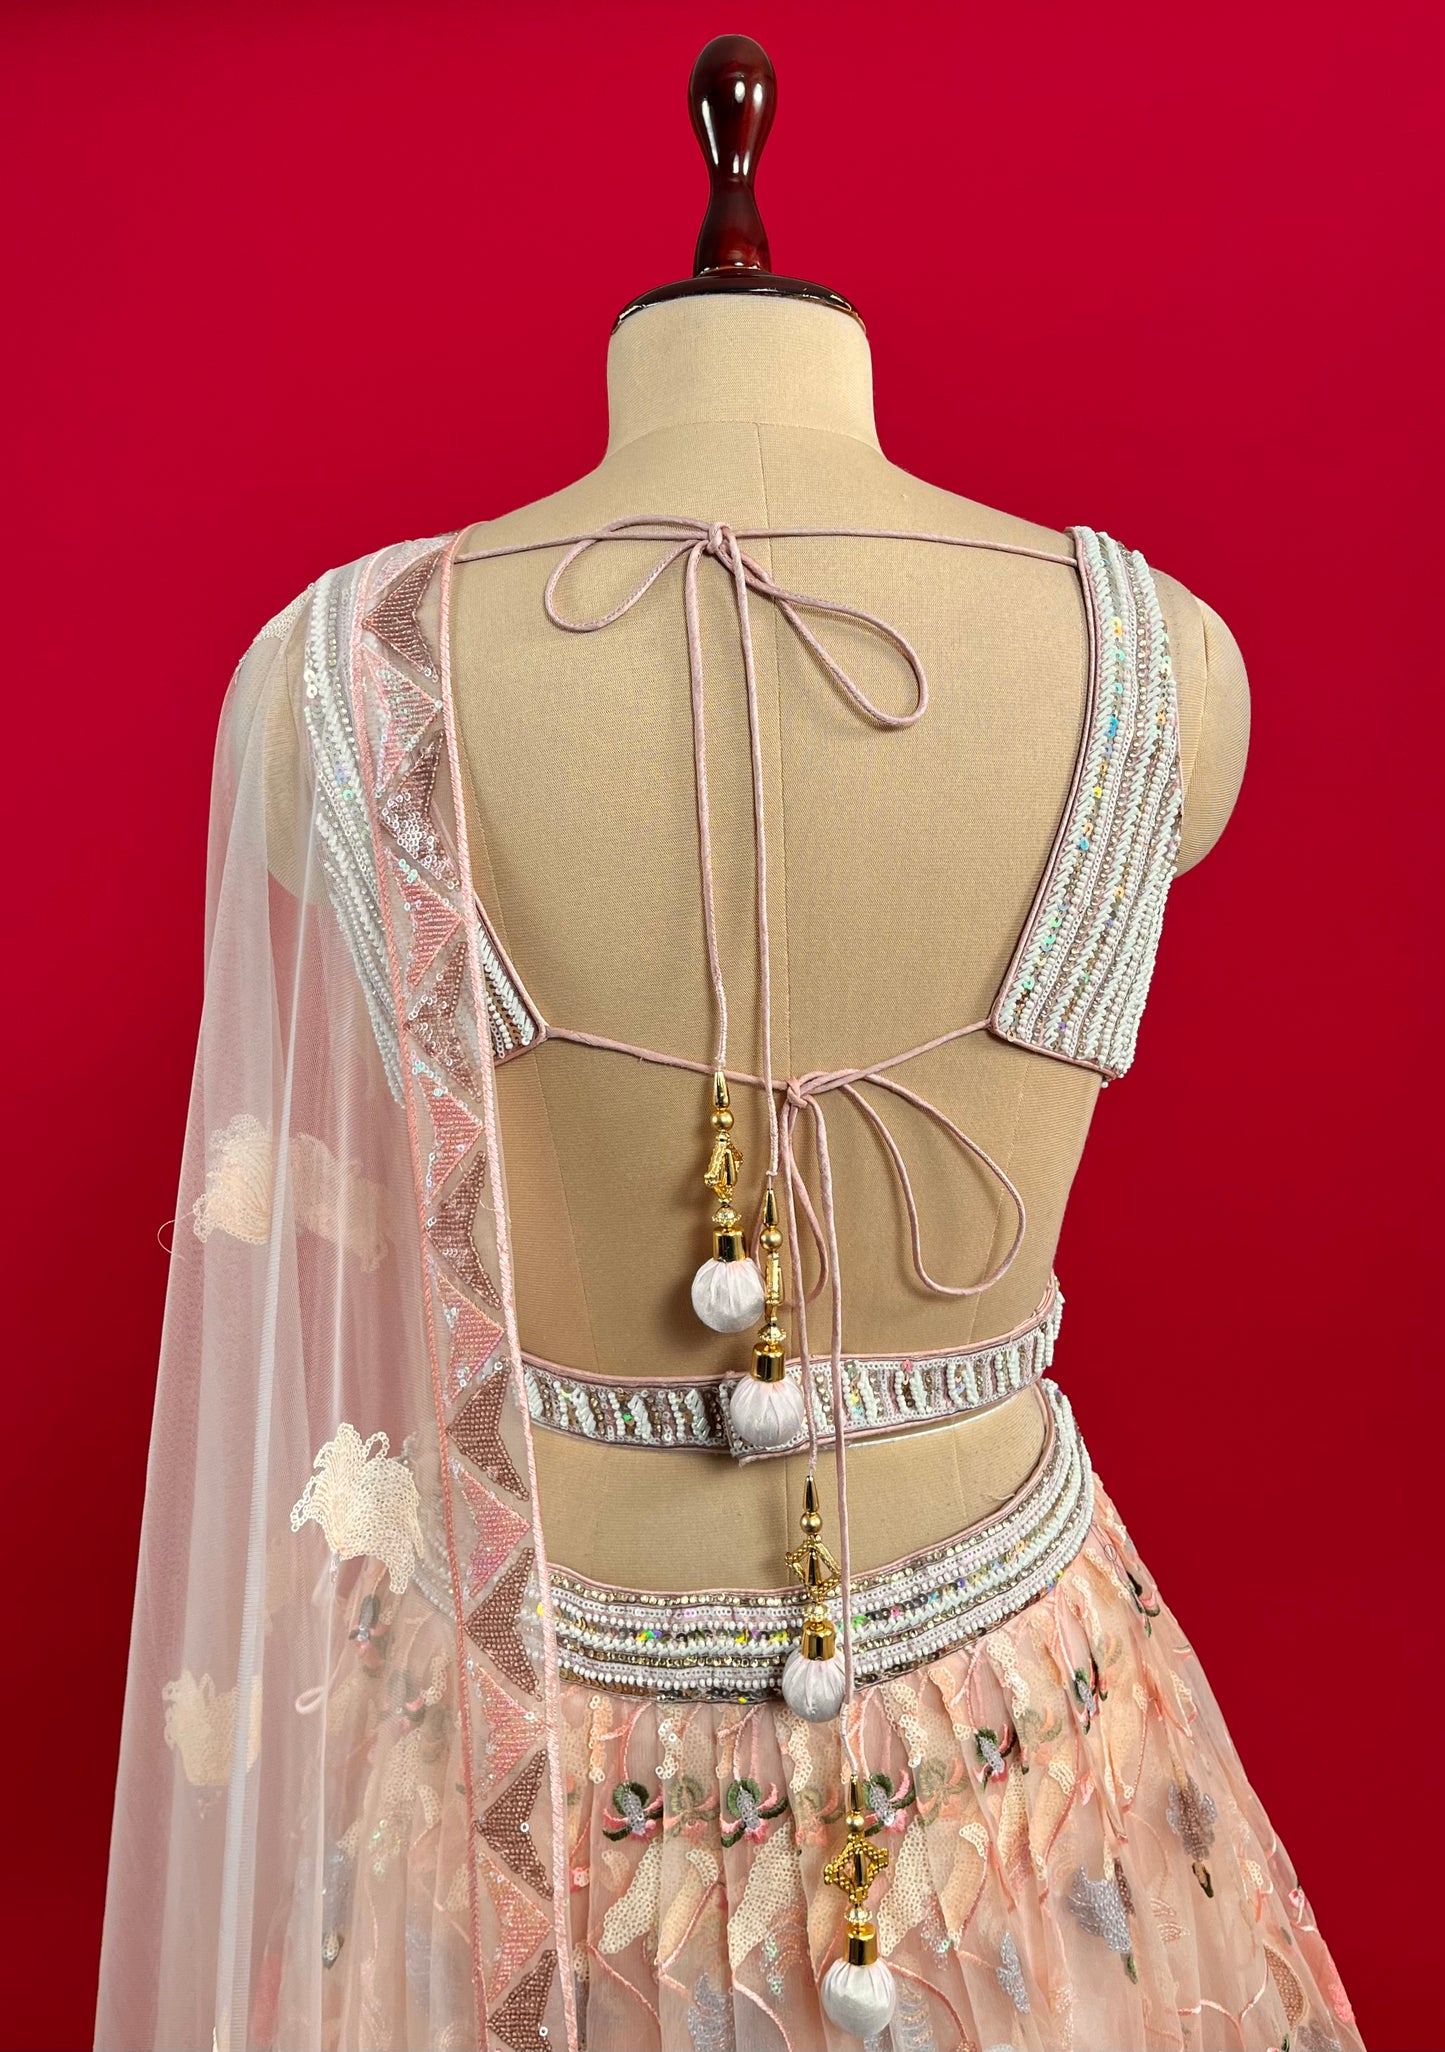 PEACH COLOUR NET SEQUINS EMBROIDERED SKIRT WITH READYMADE BLOUSE EMBELLISHED WITH BEADS & CUTDANA WORK